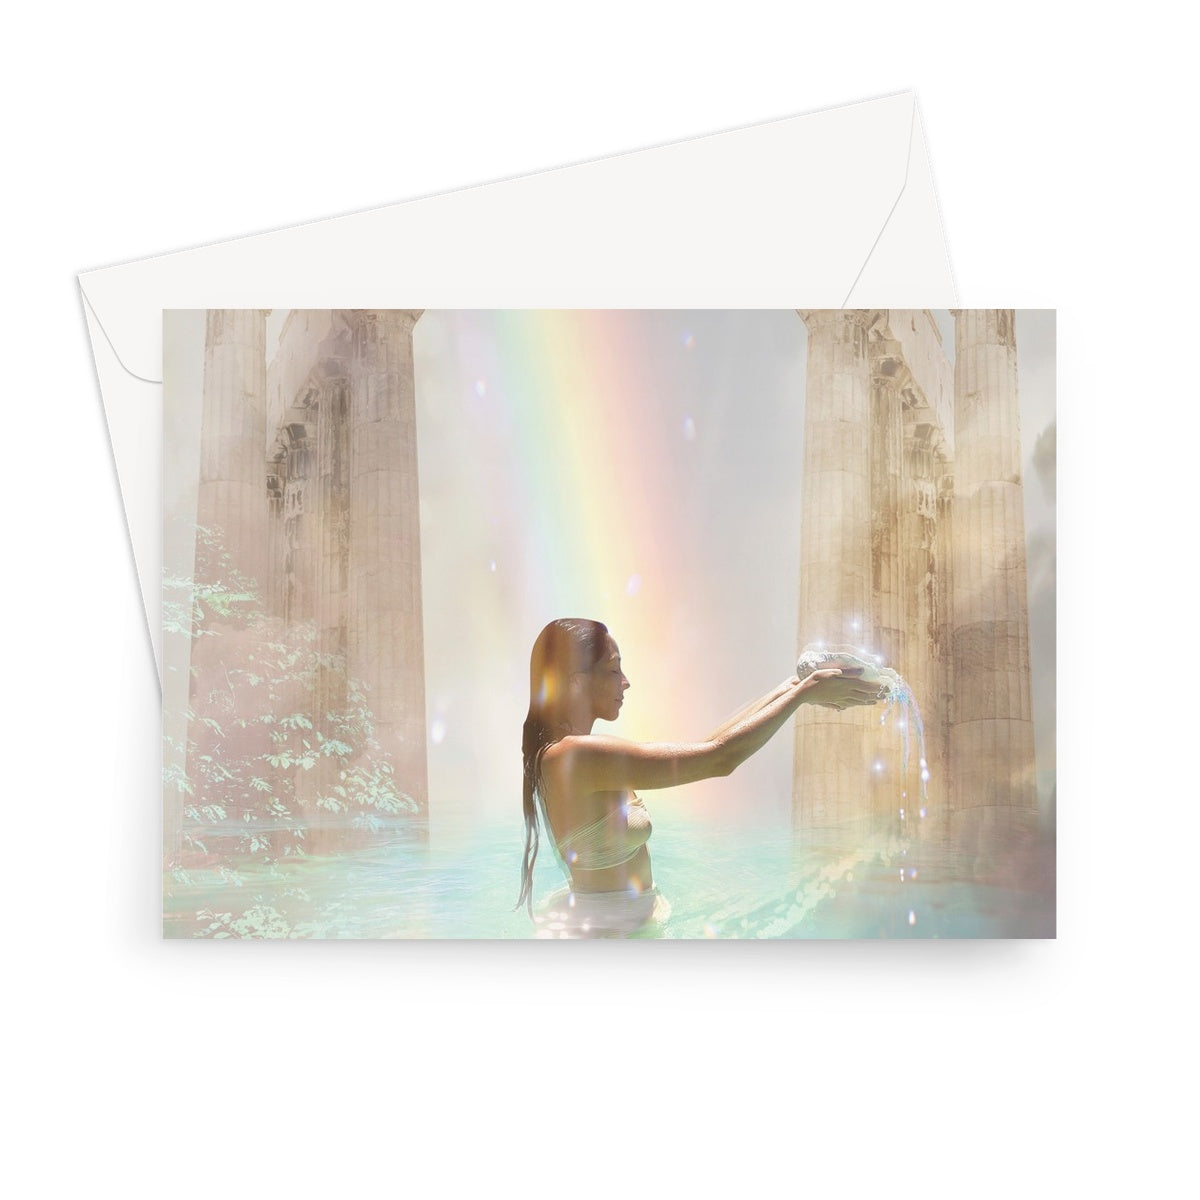 The Source Greeting Card - Starseed Designs Inc.